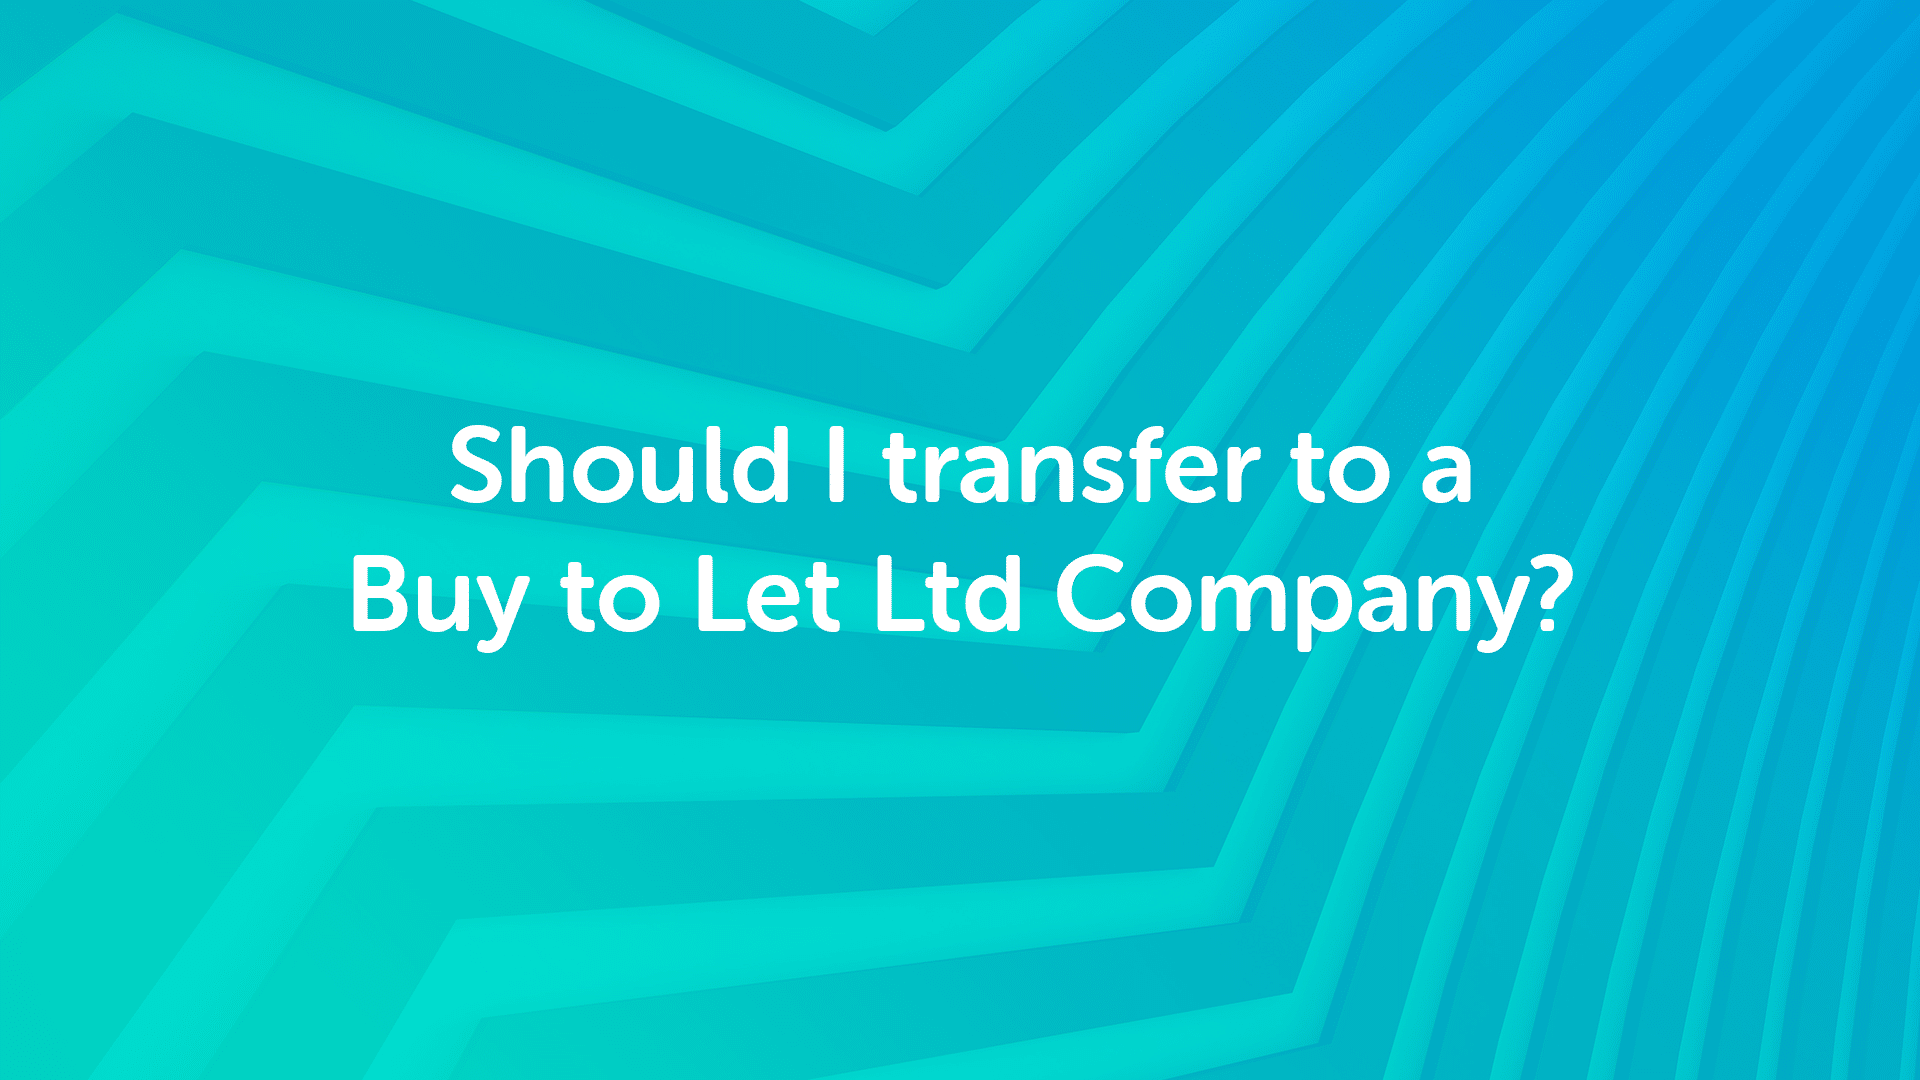 Should I Transfer to a Buy to Let Limited Company?